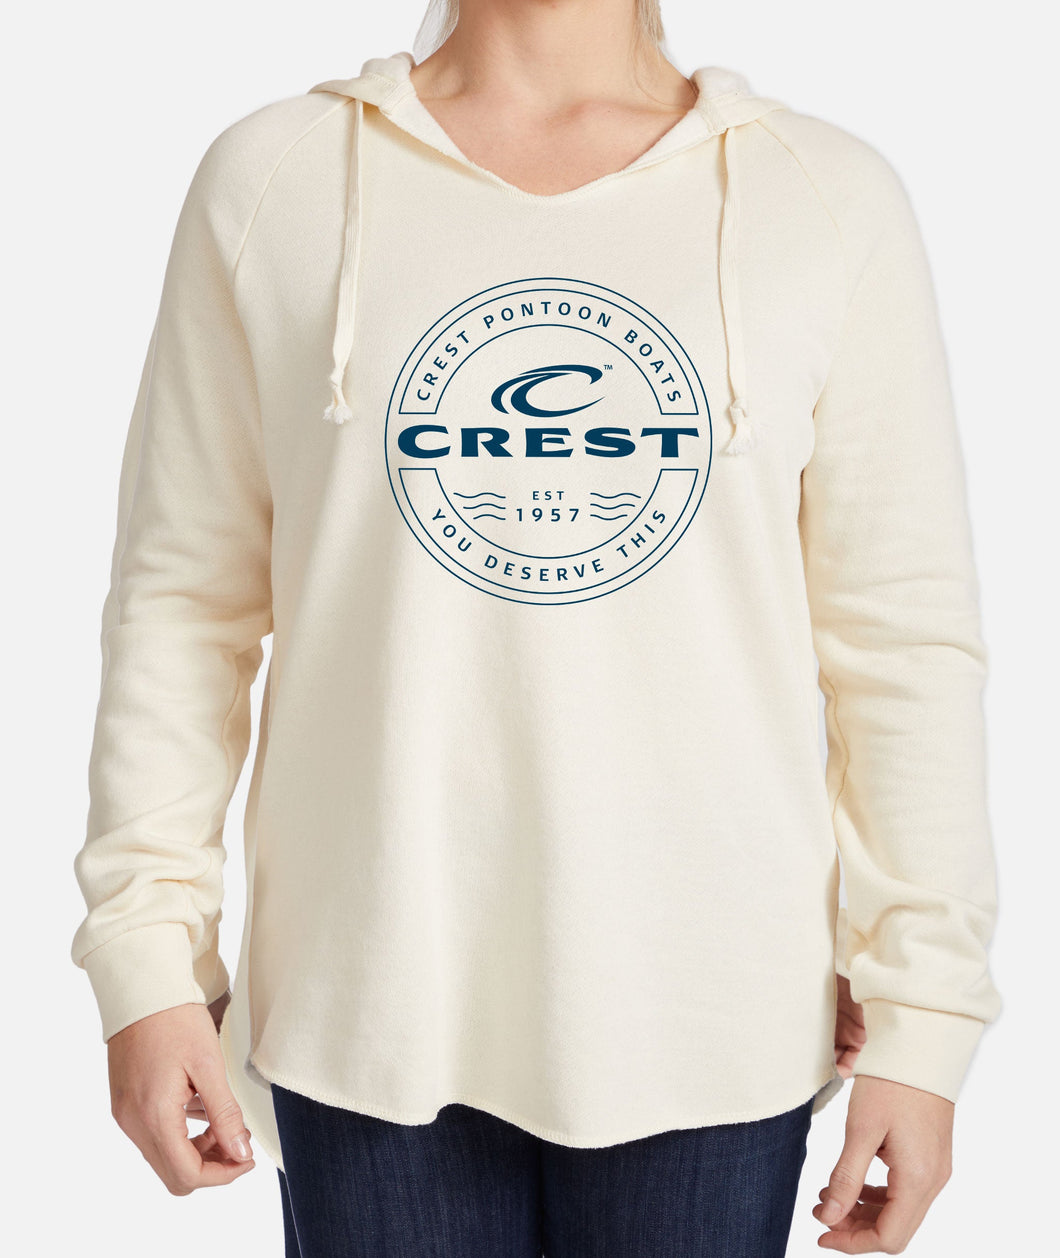 Crest You Deserve This Women's Hoodie - White